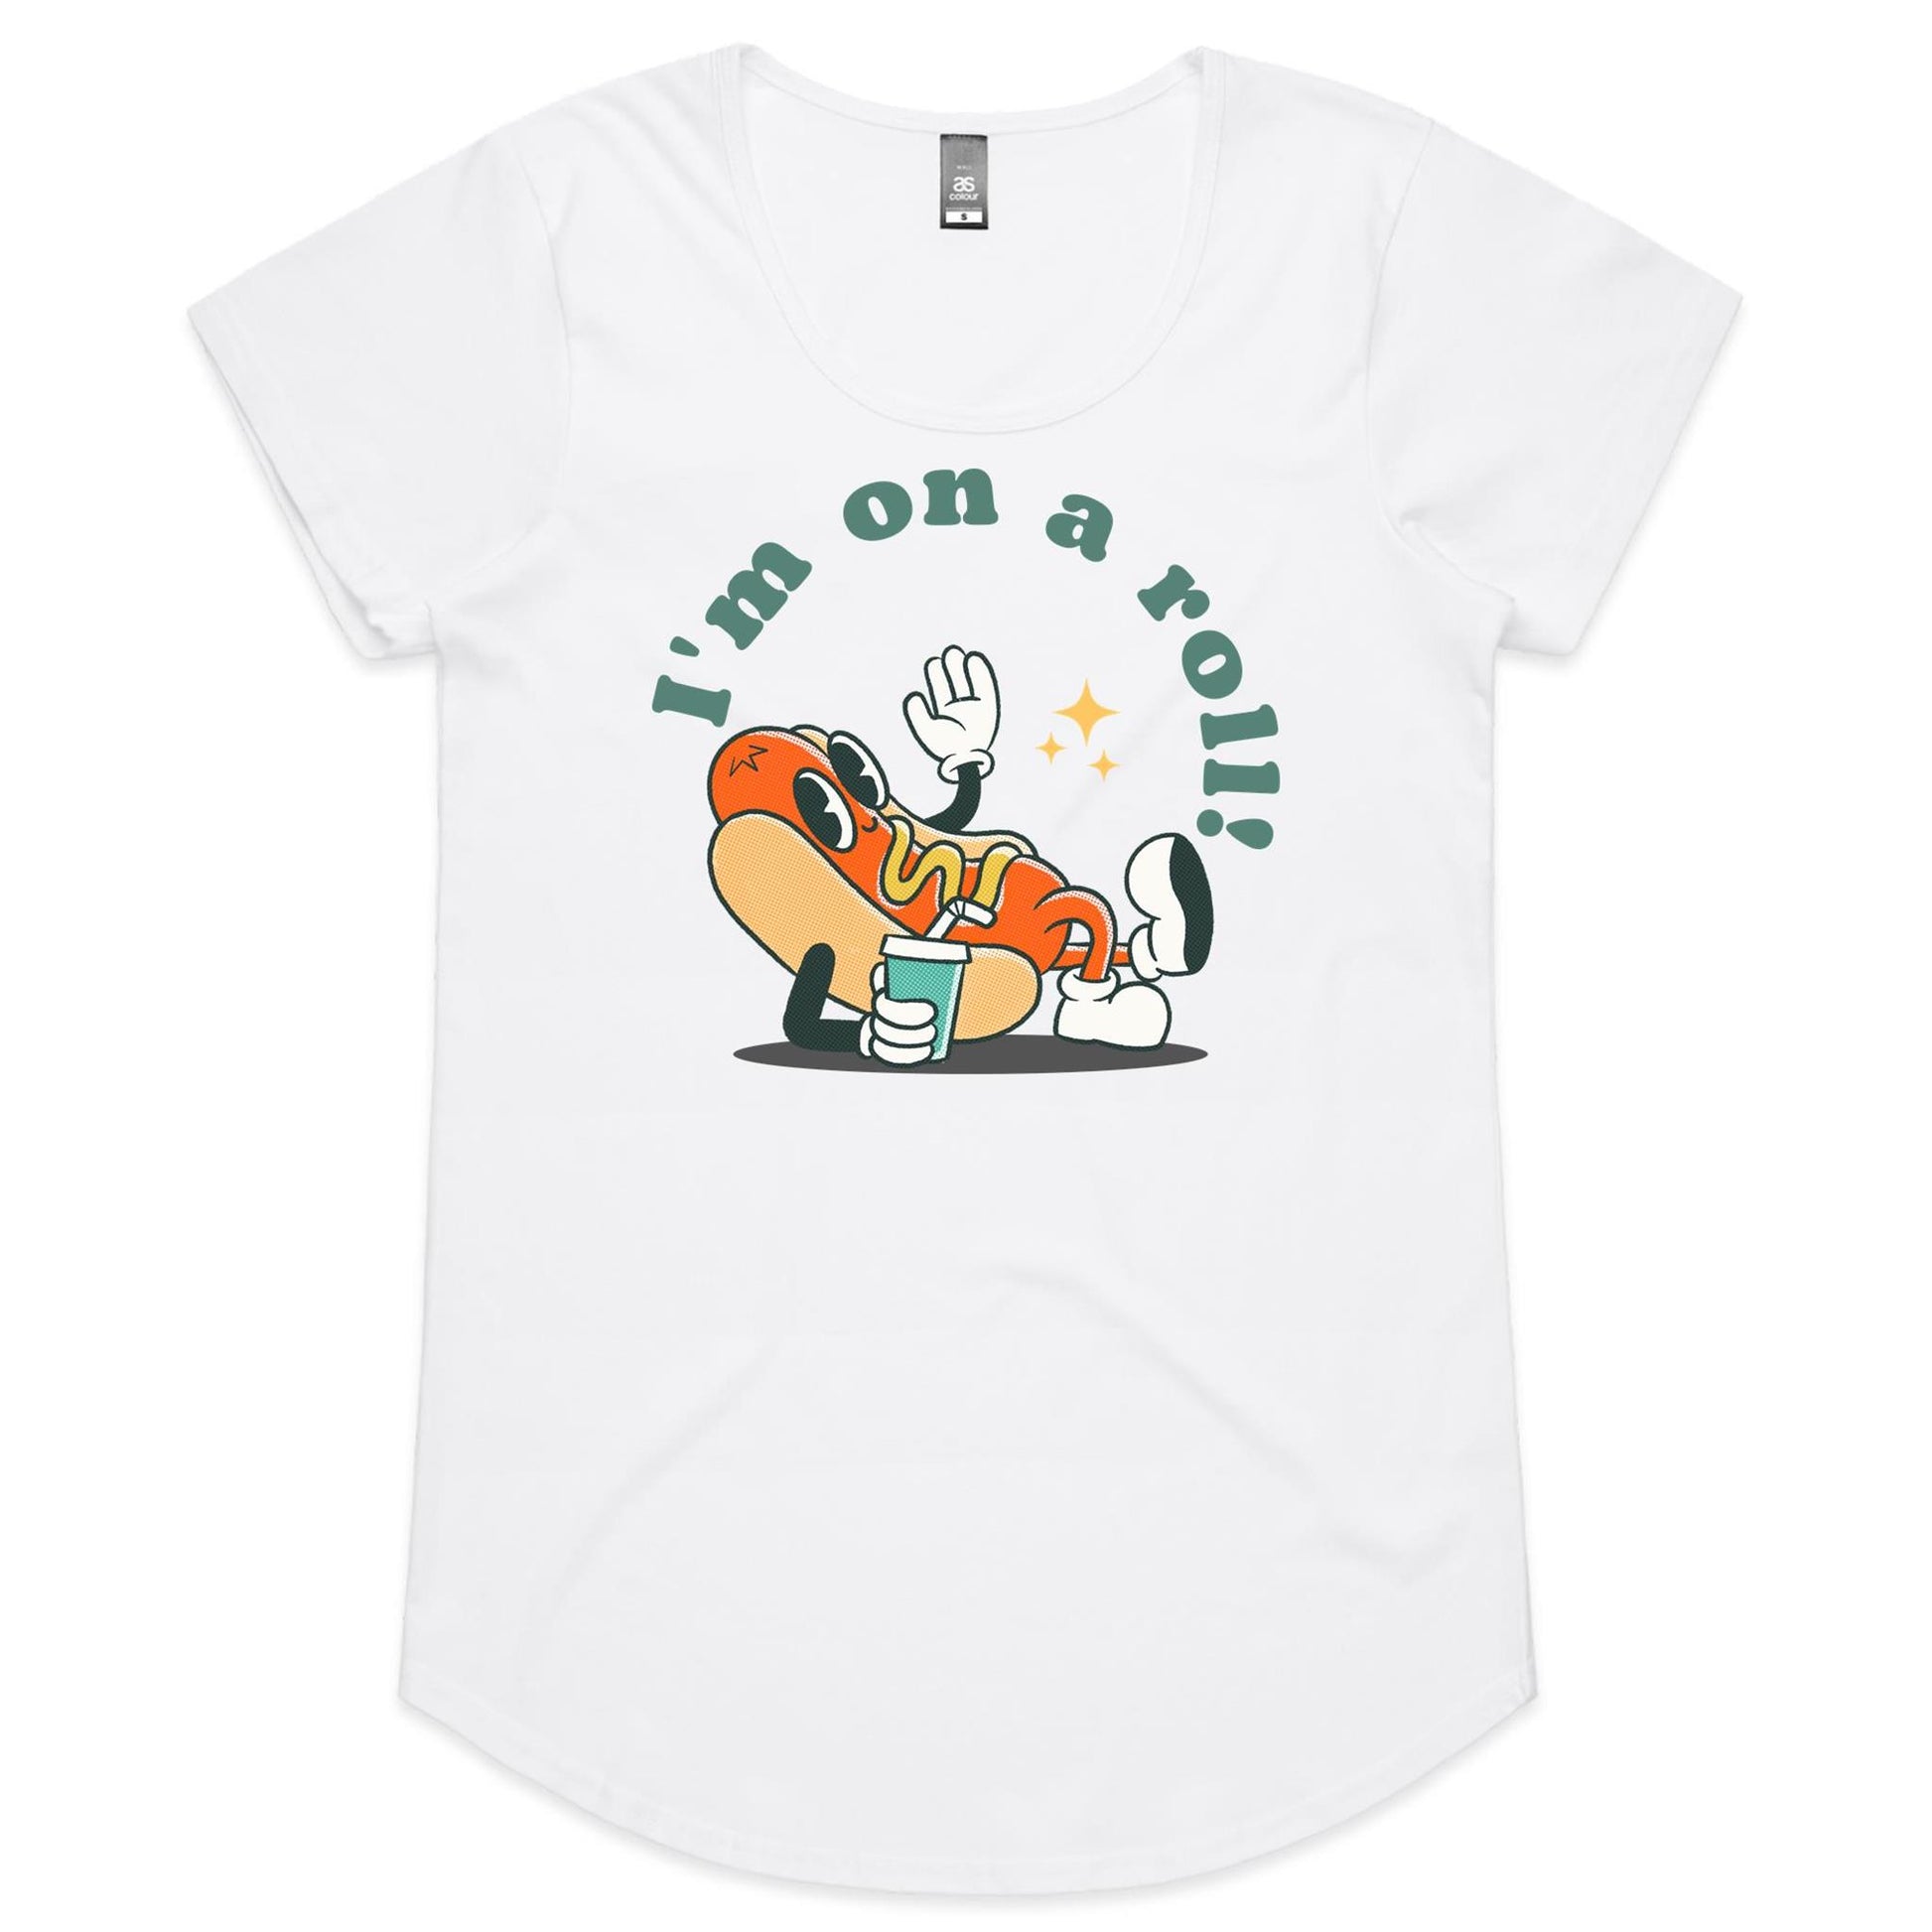 Hot Dog, I'm On A Roll - Womens Scoop Neck T-Shirt White Womens Scoop Neck T-shirt Food